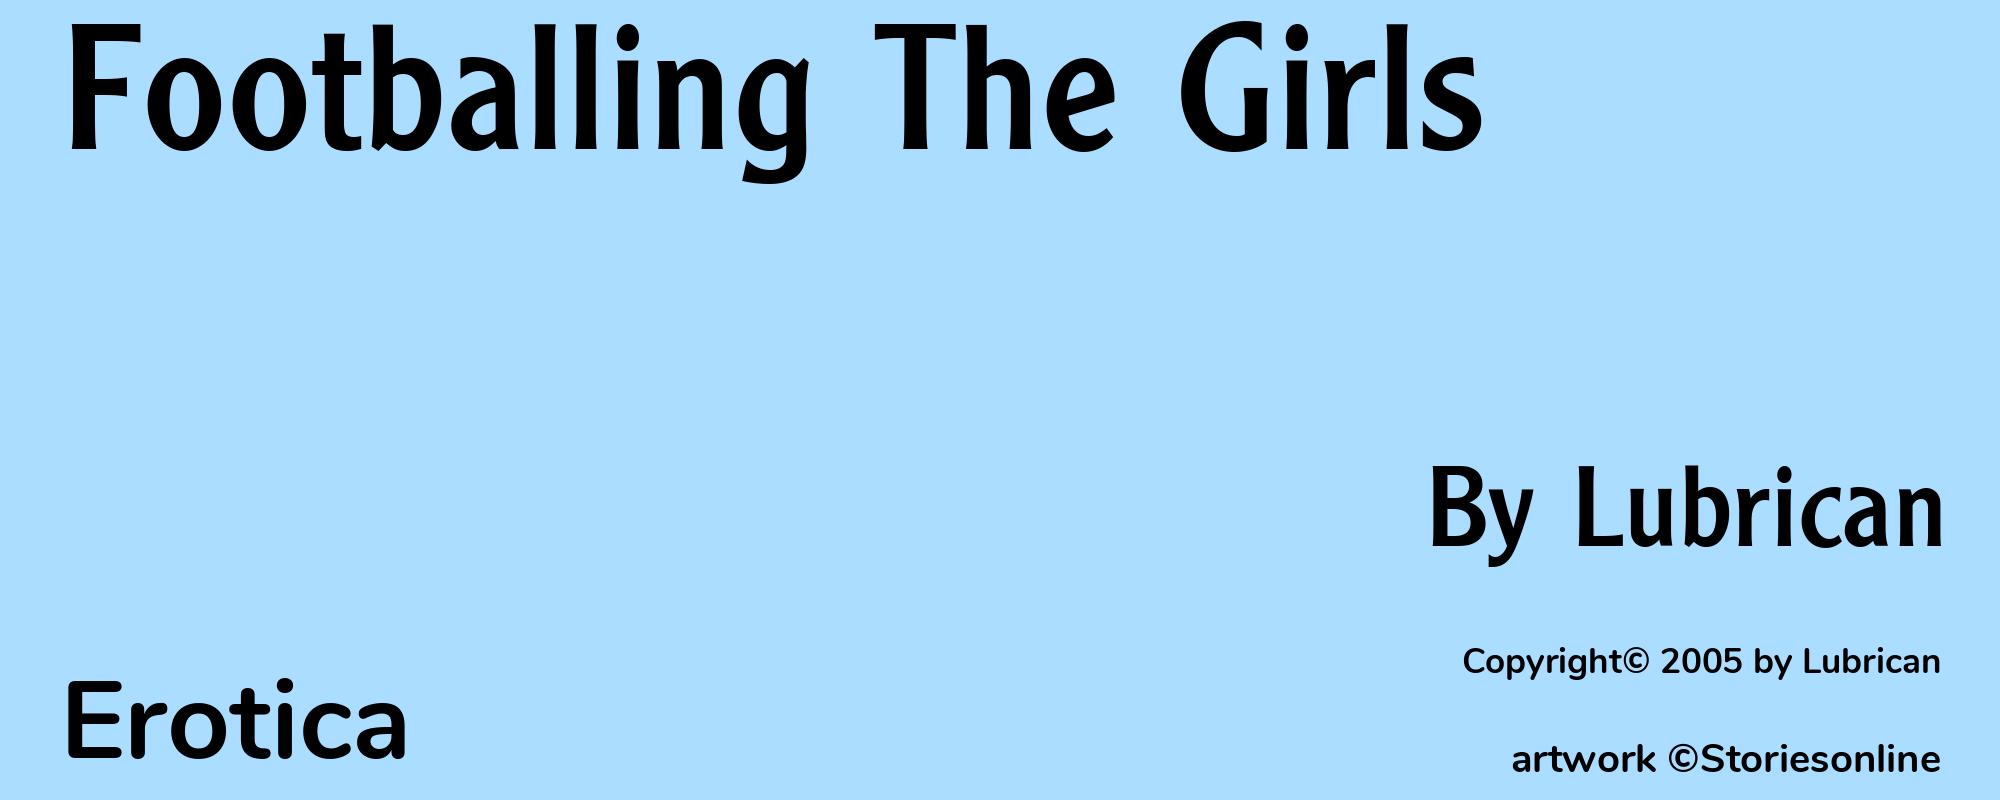 Footballing The Girls - Cover